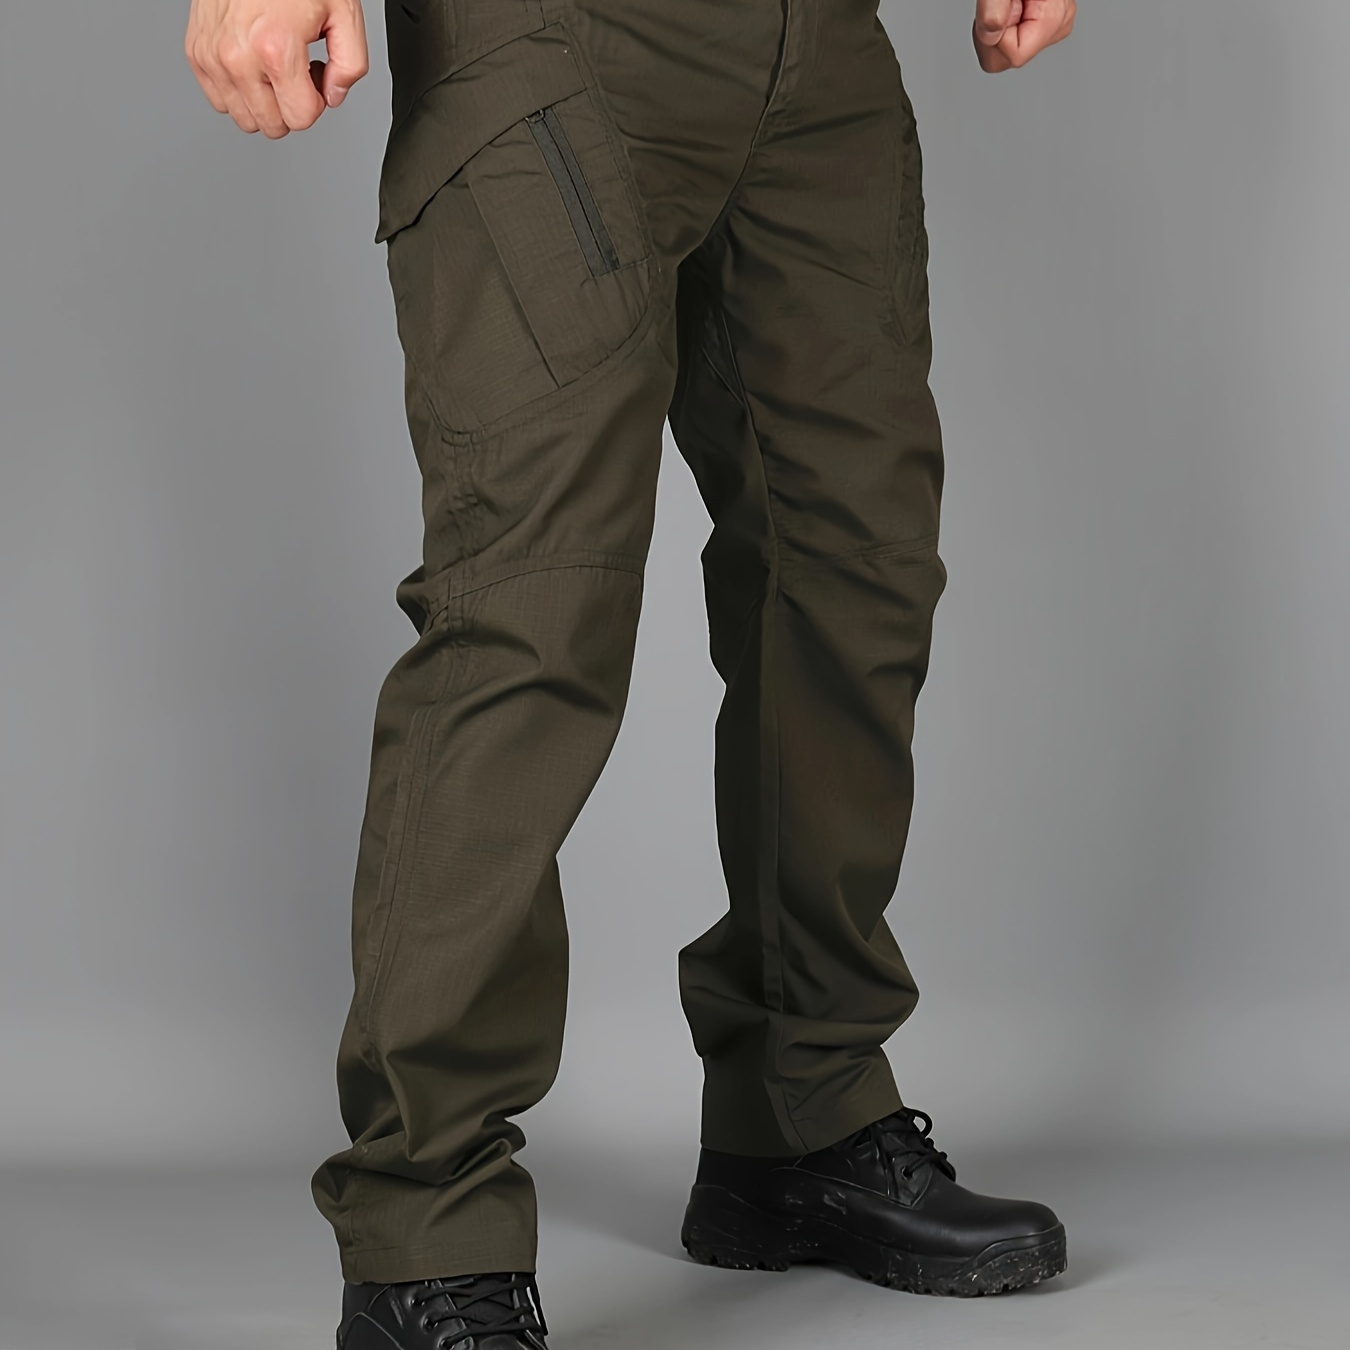 

Men's Tactical Cargo Pants, Versatile Multi-pocket Outdoor Trousers For Hiking Camping And Mountaineering